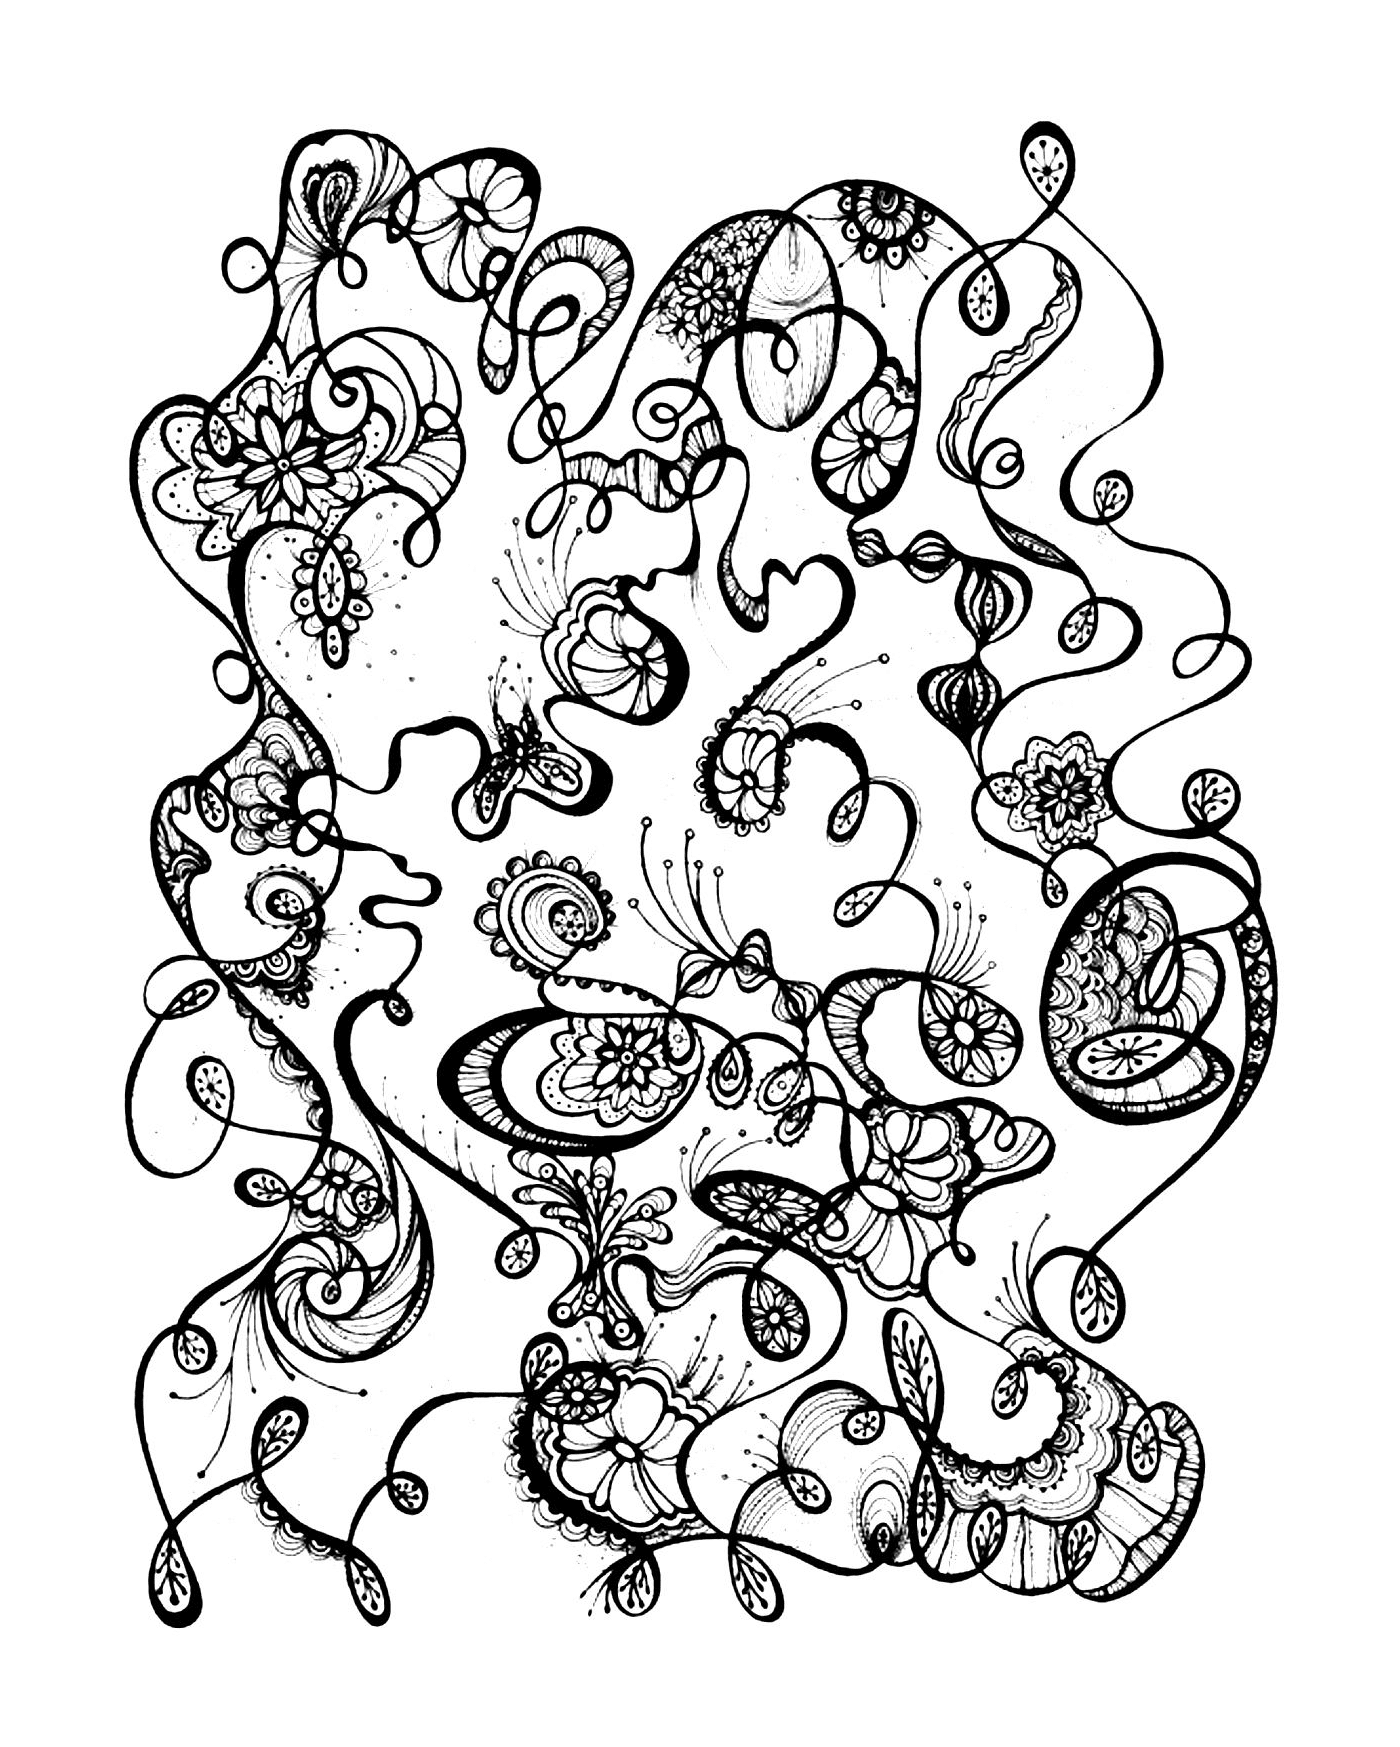  an abstract black and white pattern with flowers 